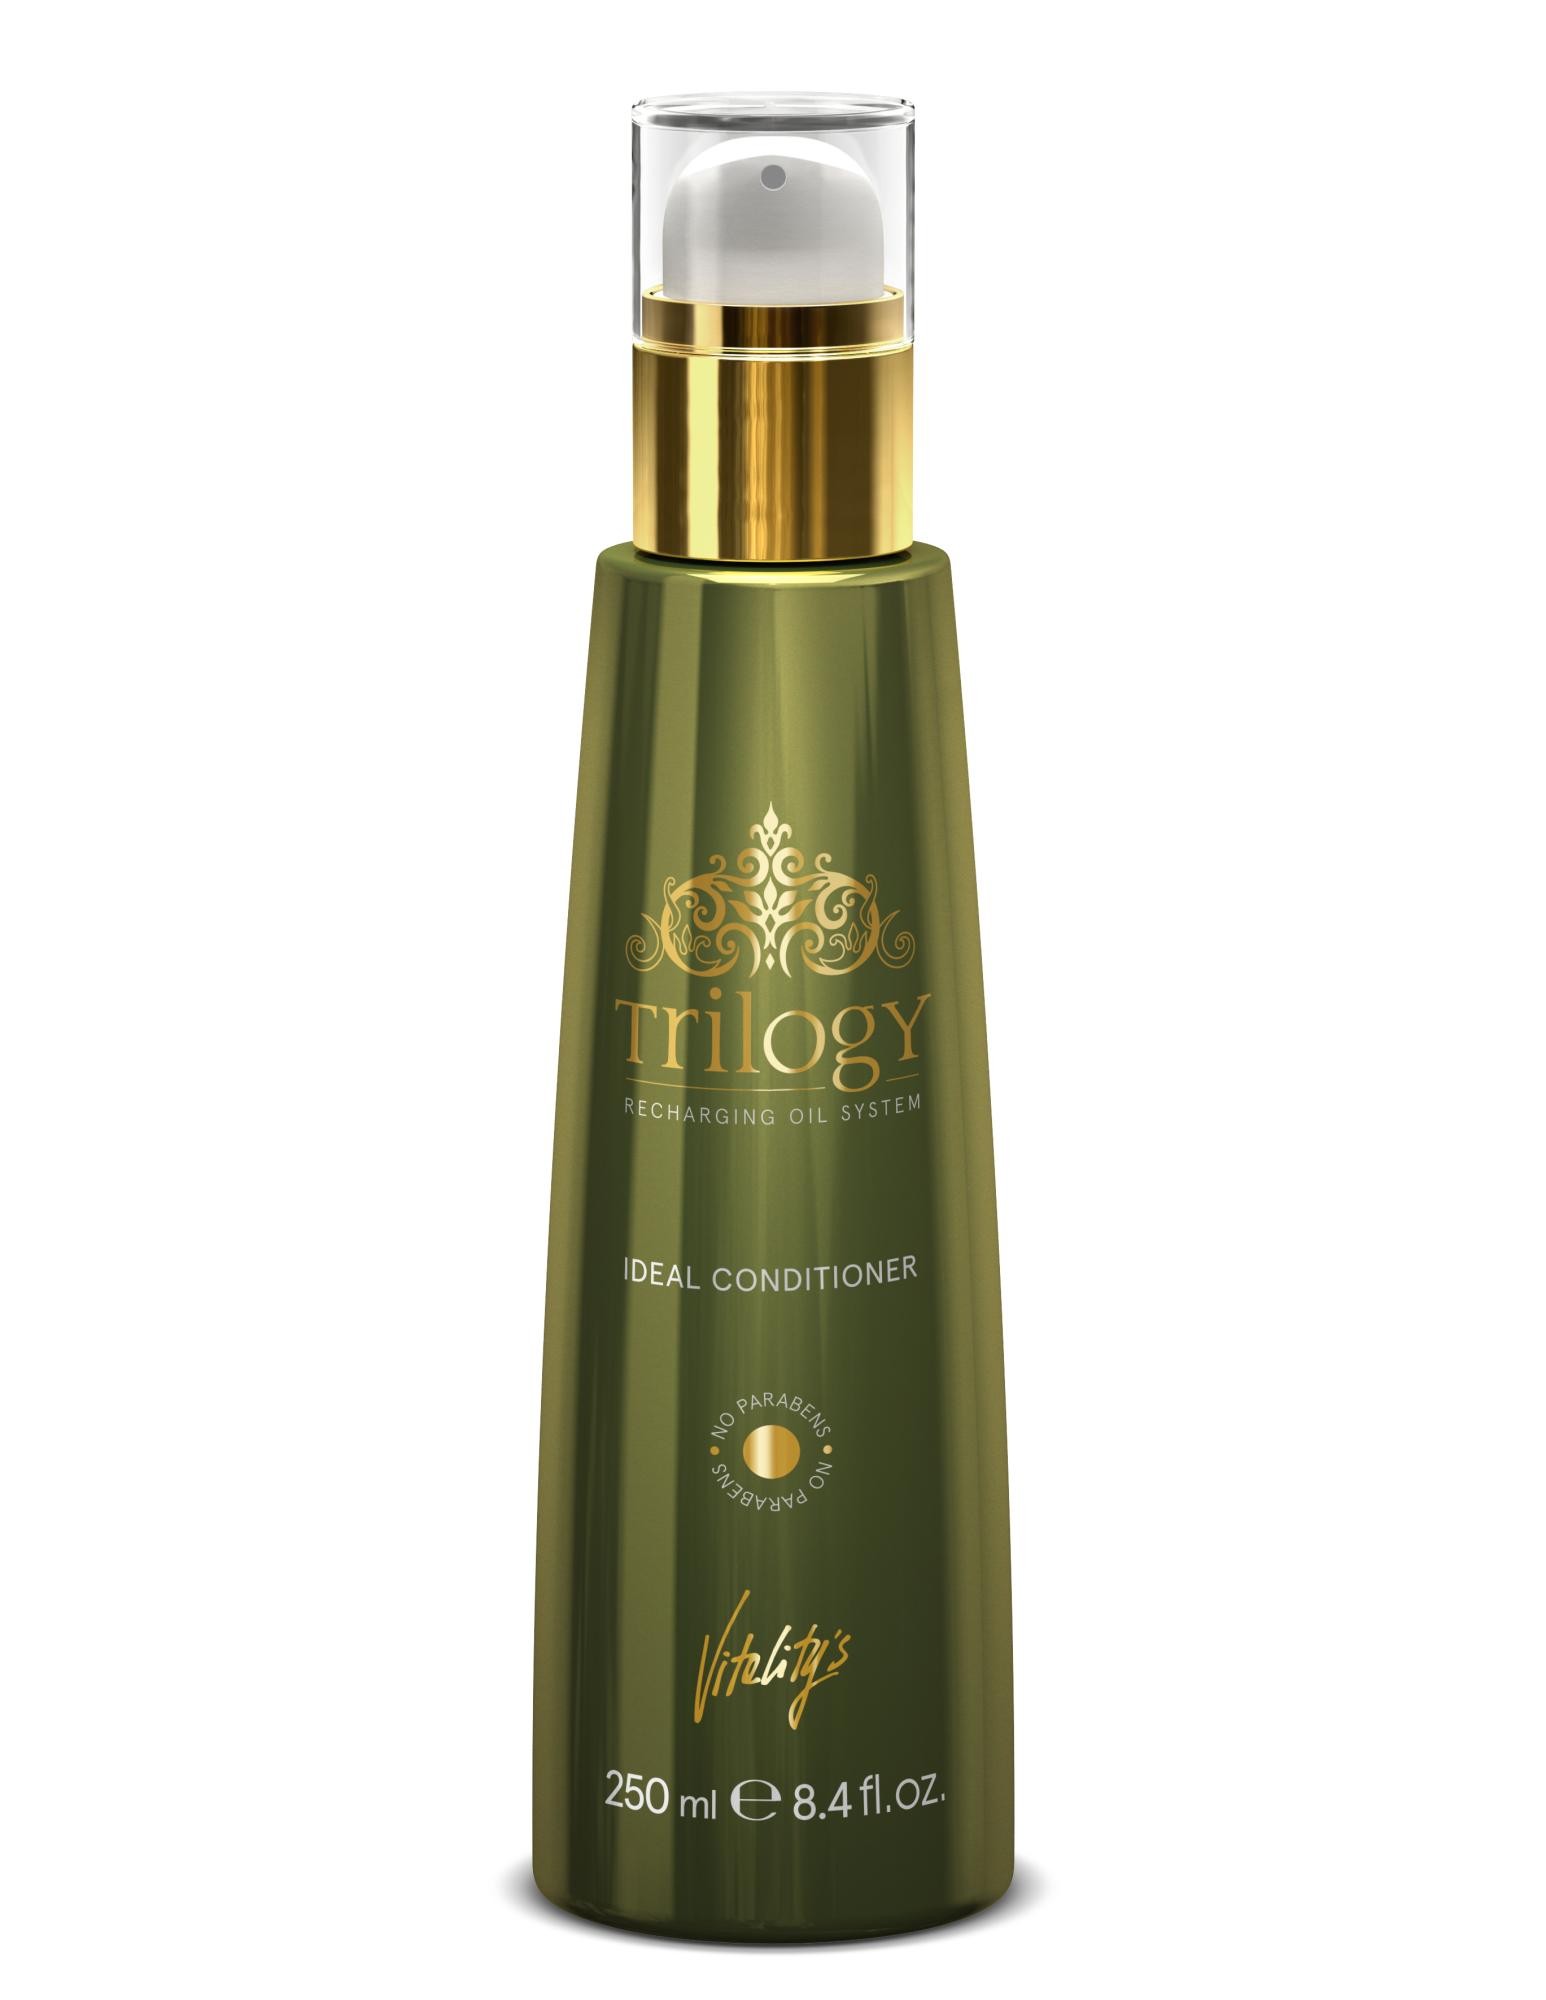 Vitality`s Trilogy Ideal conditioner 250 ml